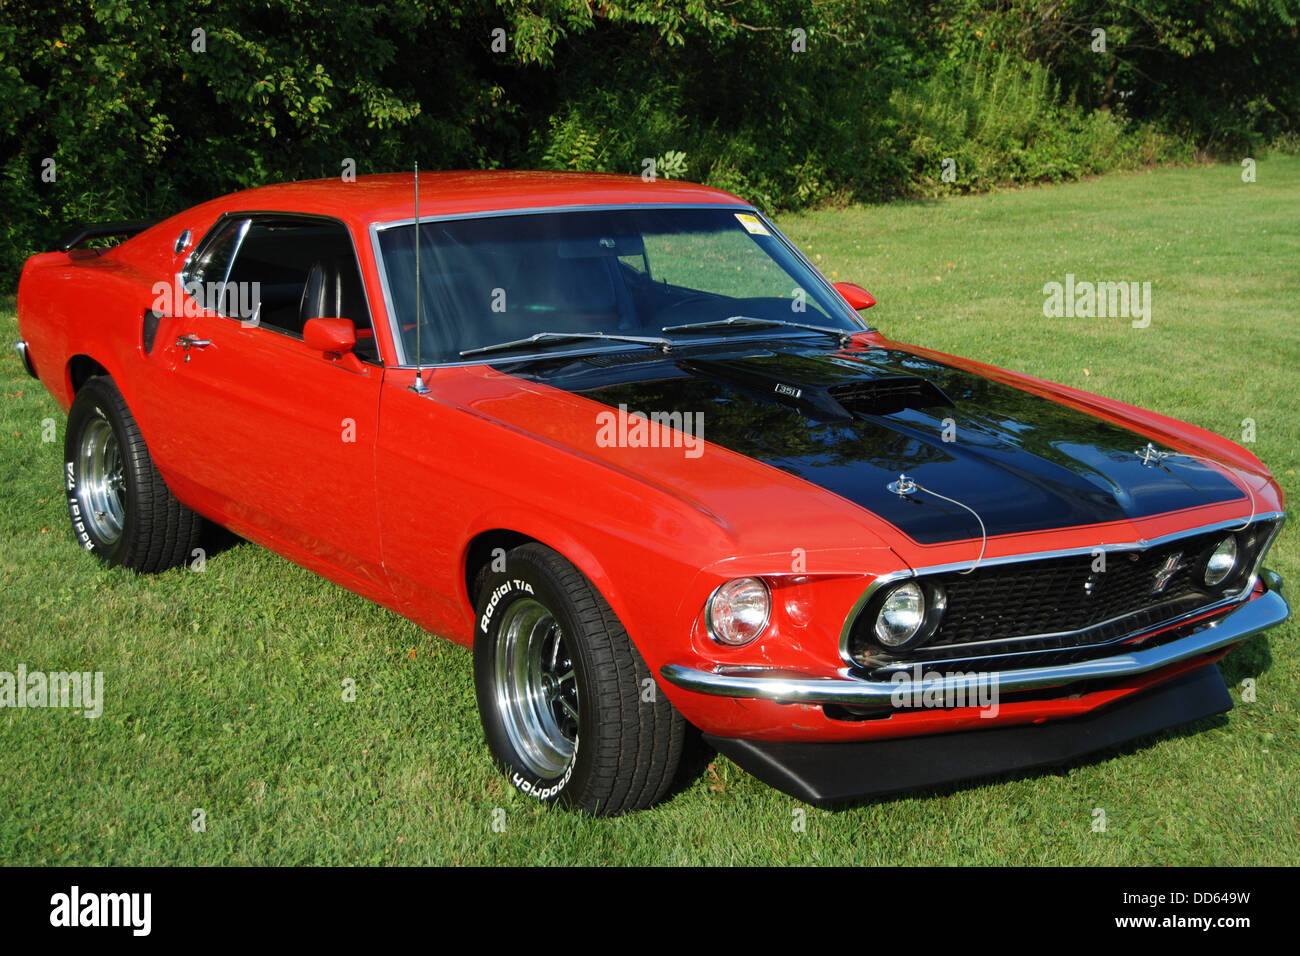 1969 Ford Mustang Mach 1 Foto stock - Alamy